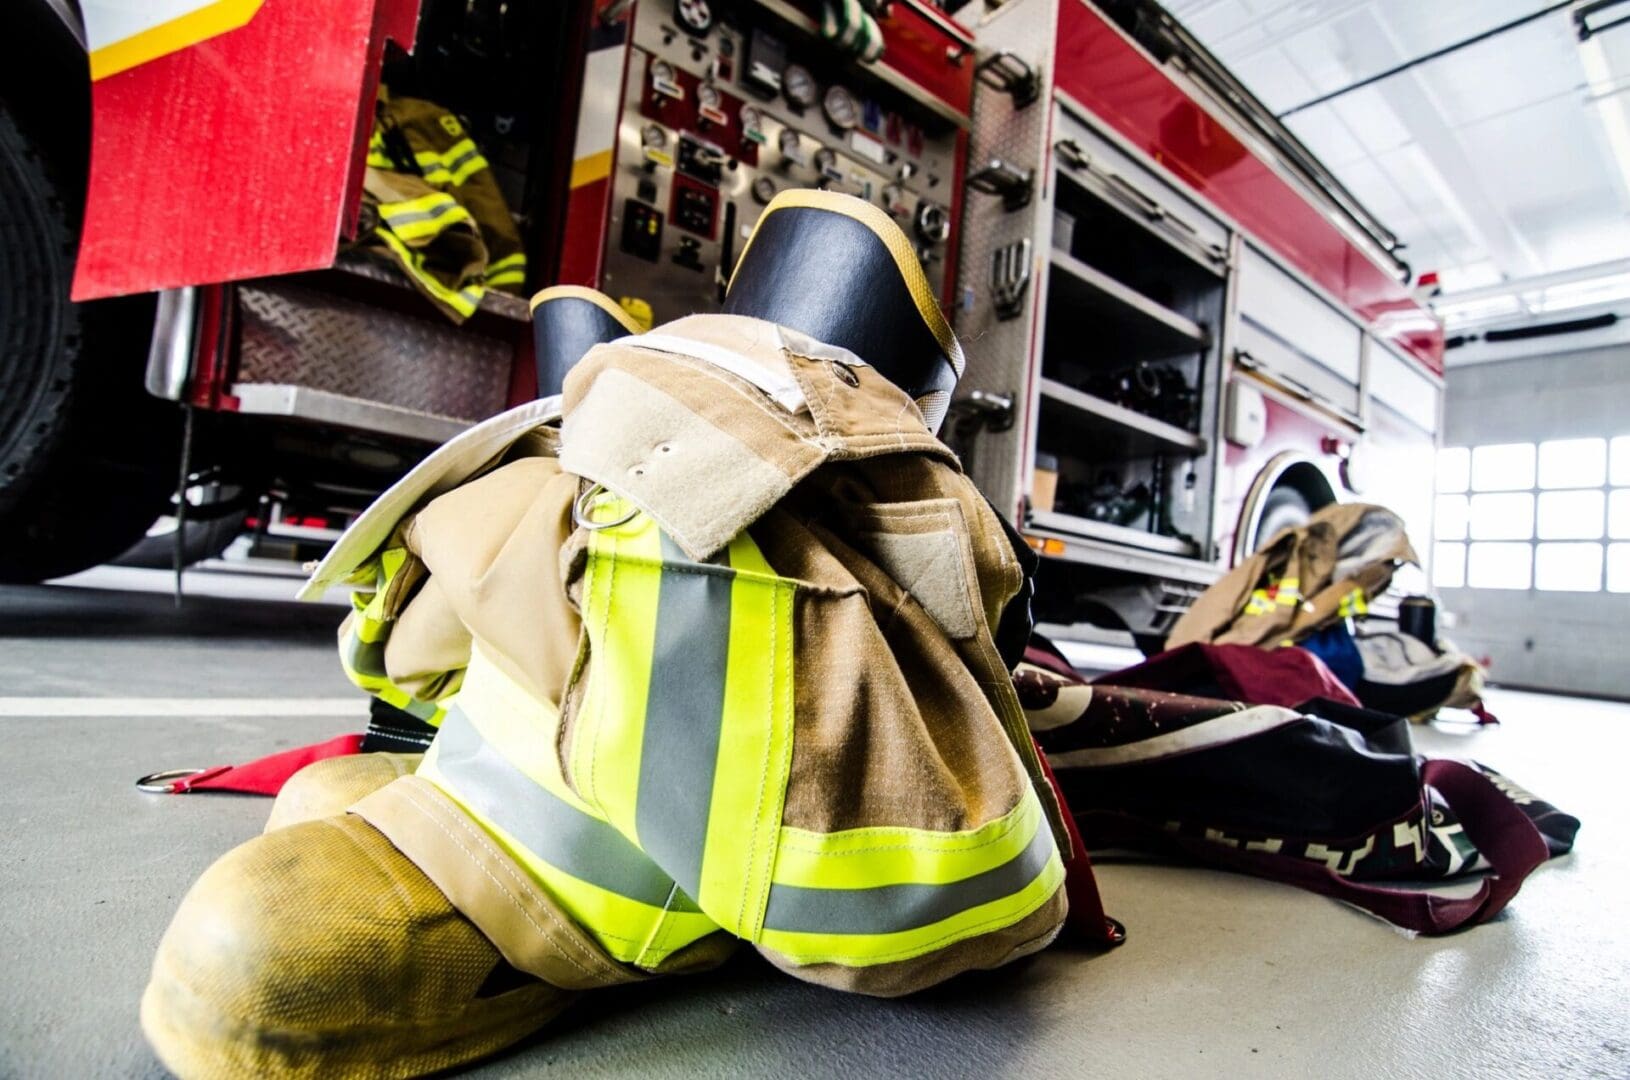 A firefighter's gear is sitting on the floor in front of a fire truck.